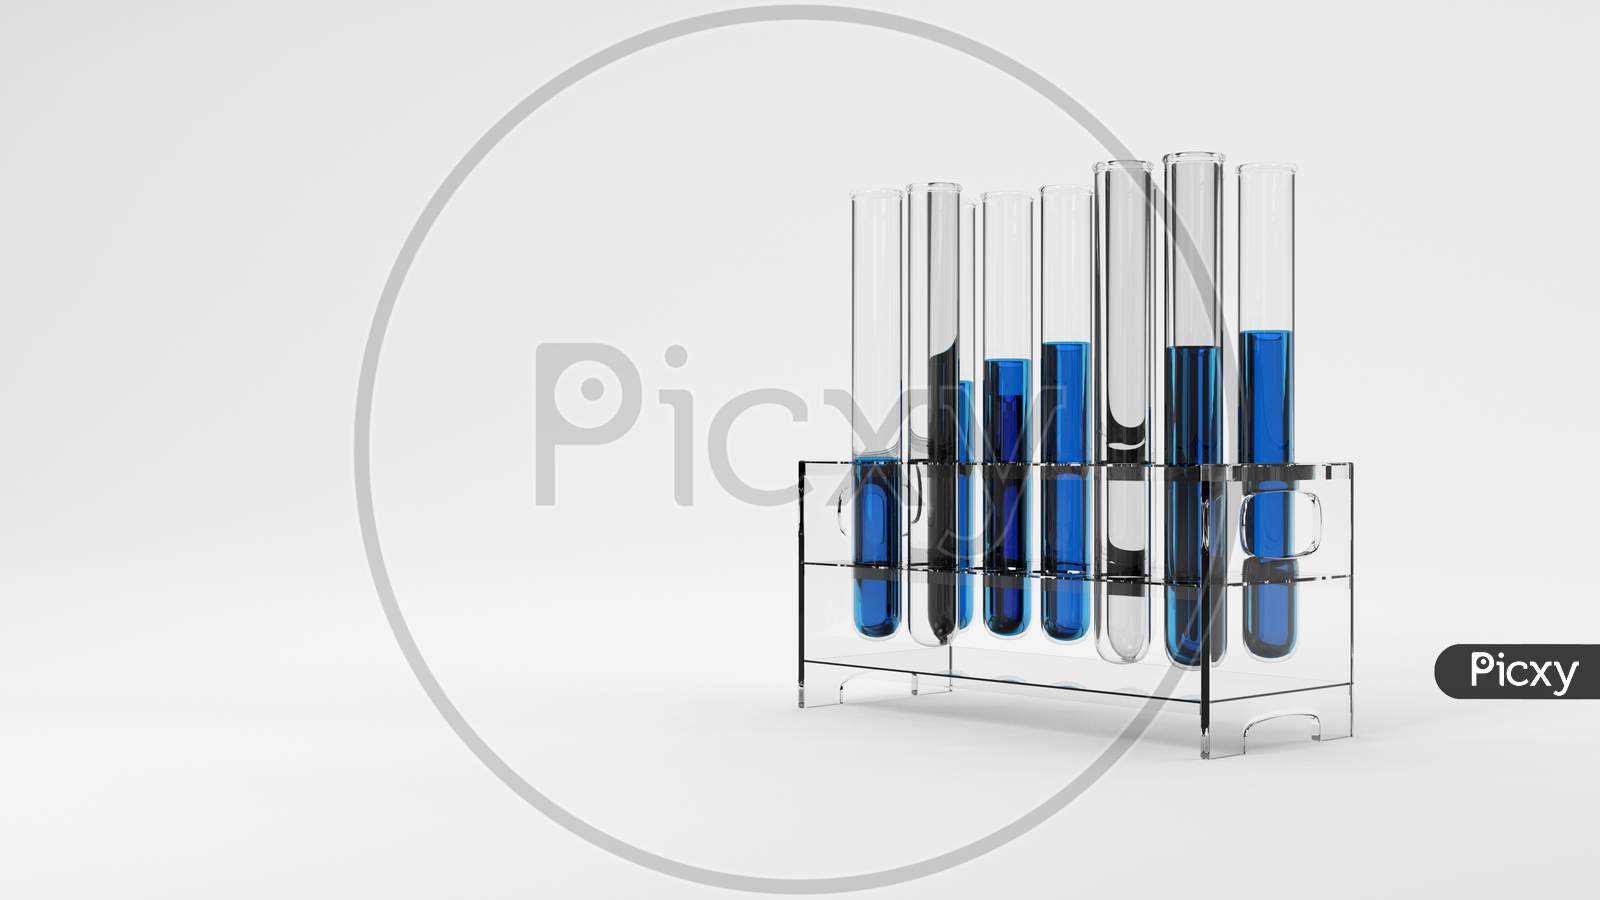 Group Of Test Tube With Blue Solution Sample In Laboratory On White Background. Science Researching And Nanotechnology Biology Concept. Selective Focus On Liquid Water Drop. 3D Illustration Rendering